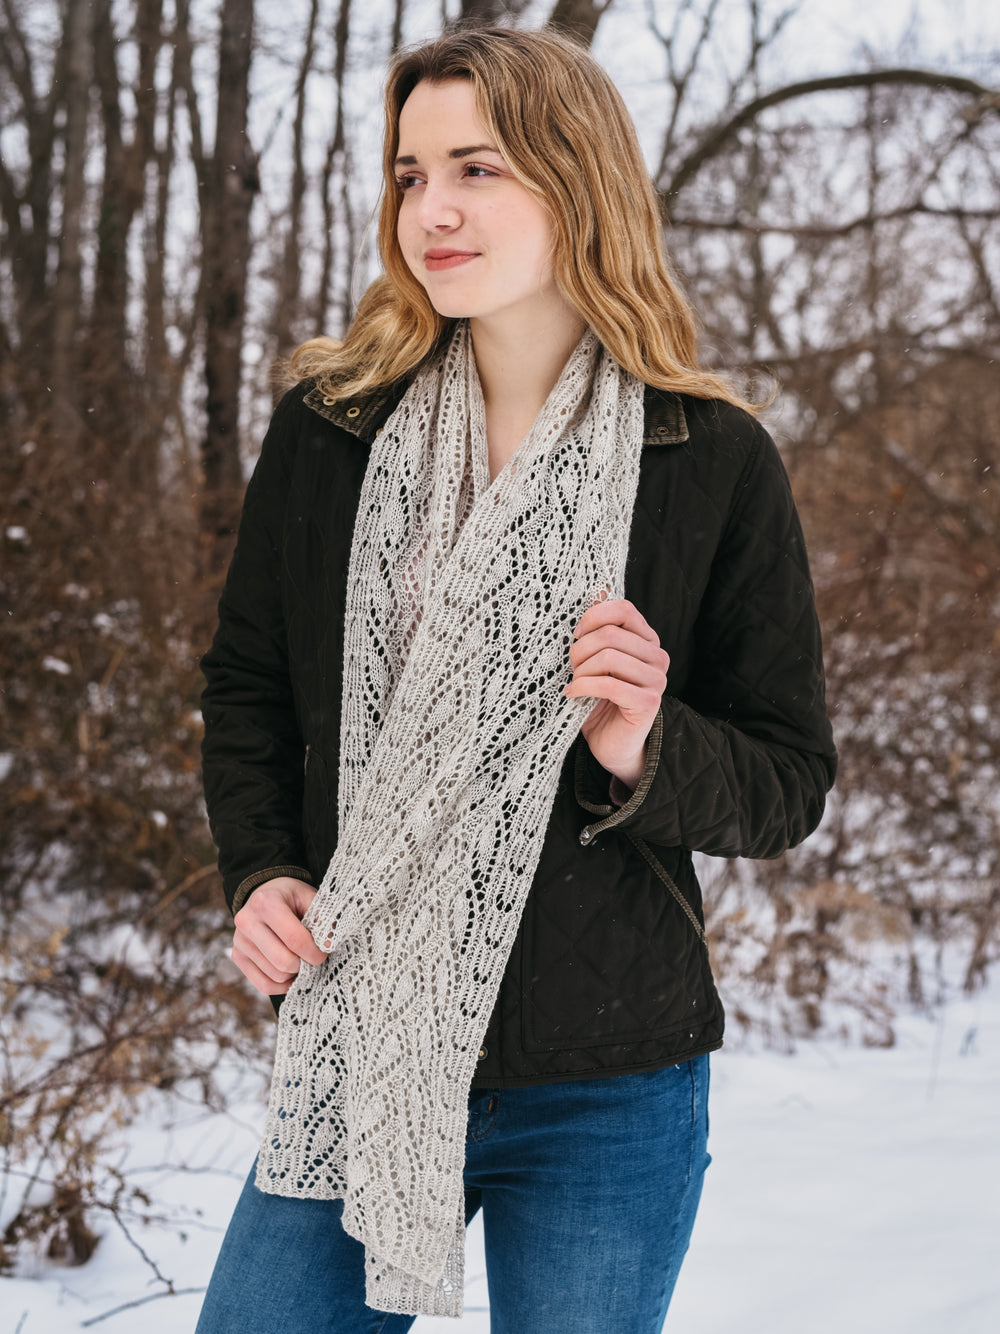 Whitethistle Scarf or Stole by Knitspot